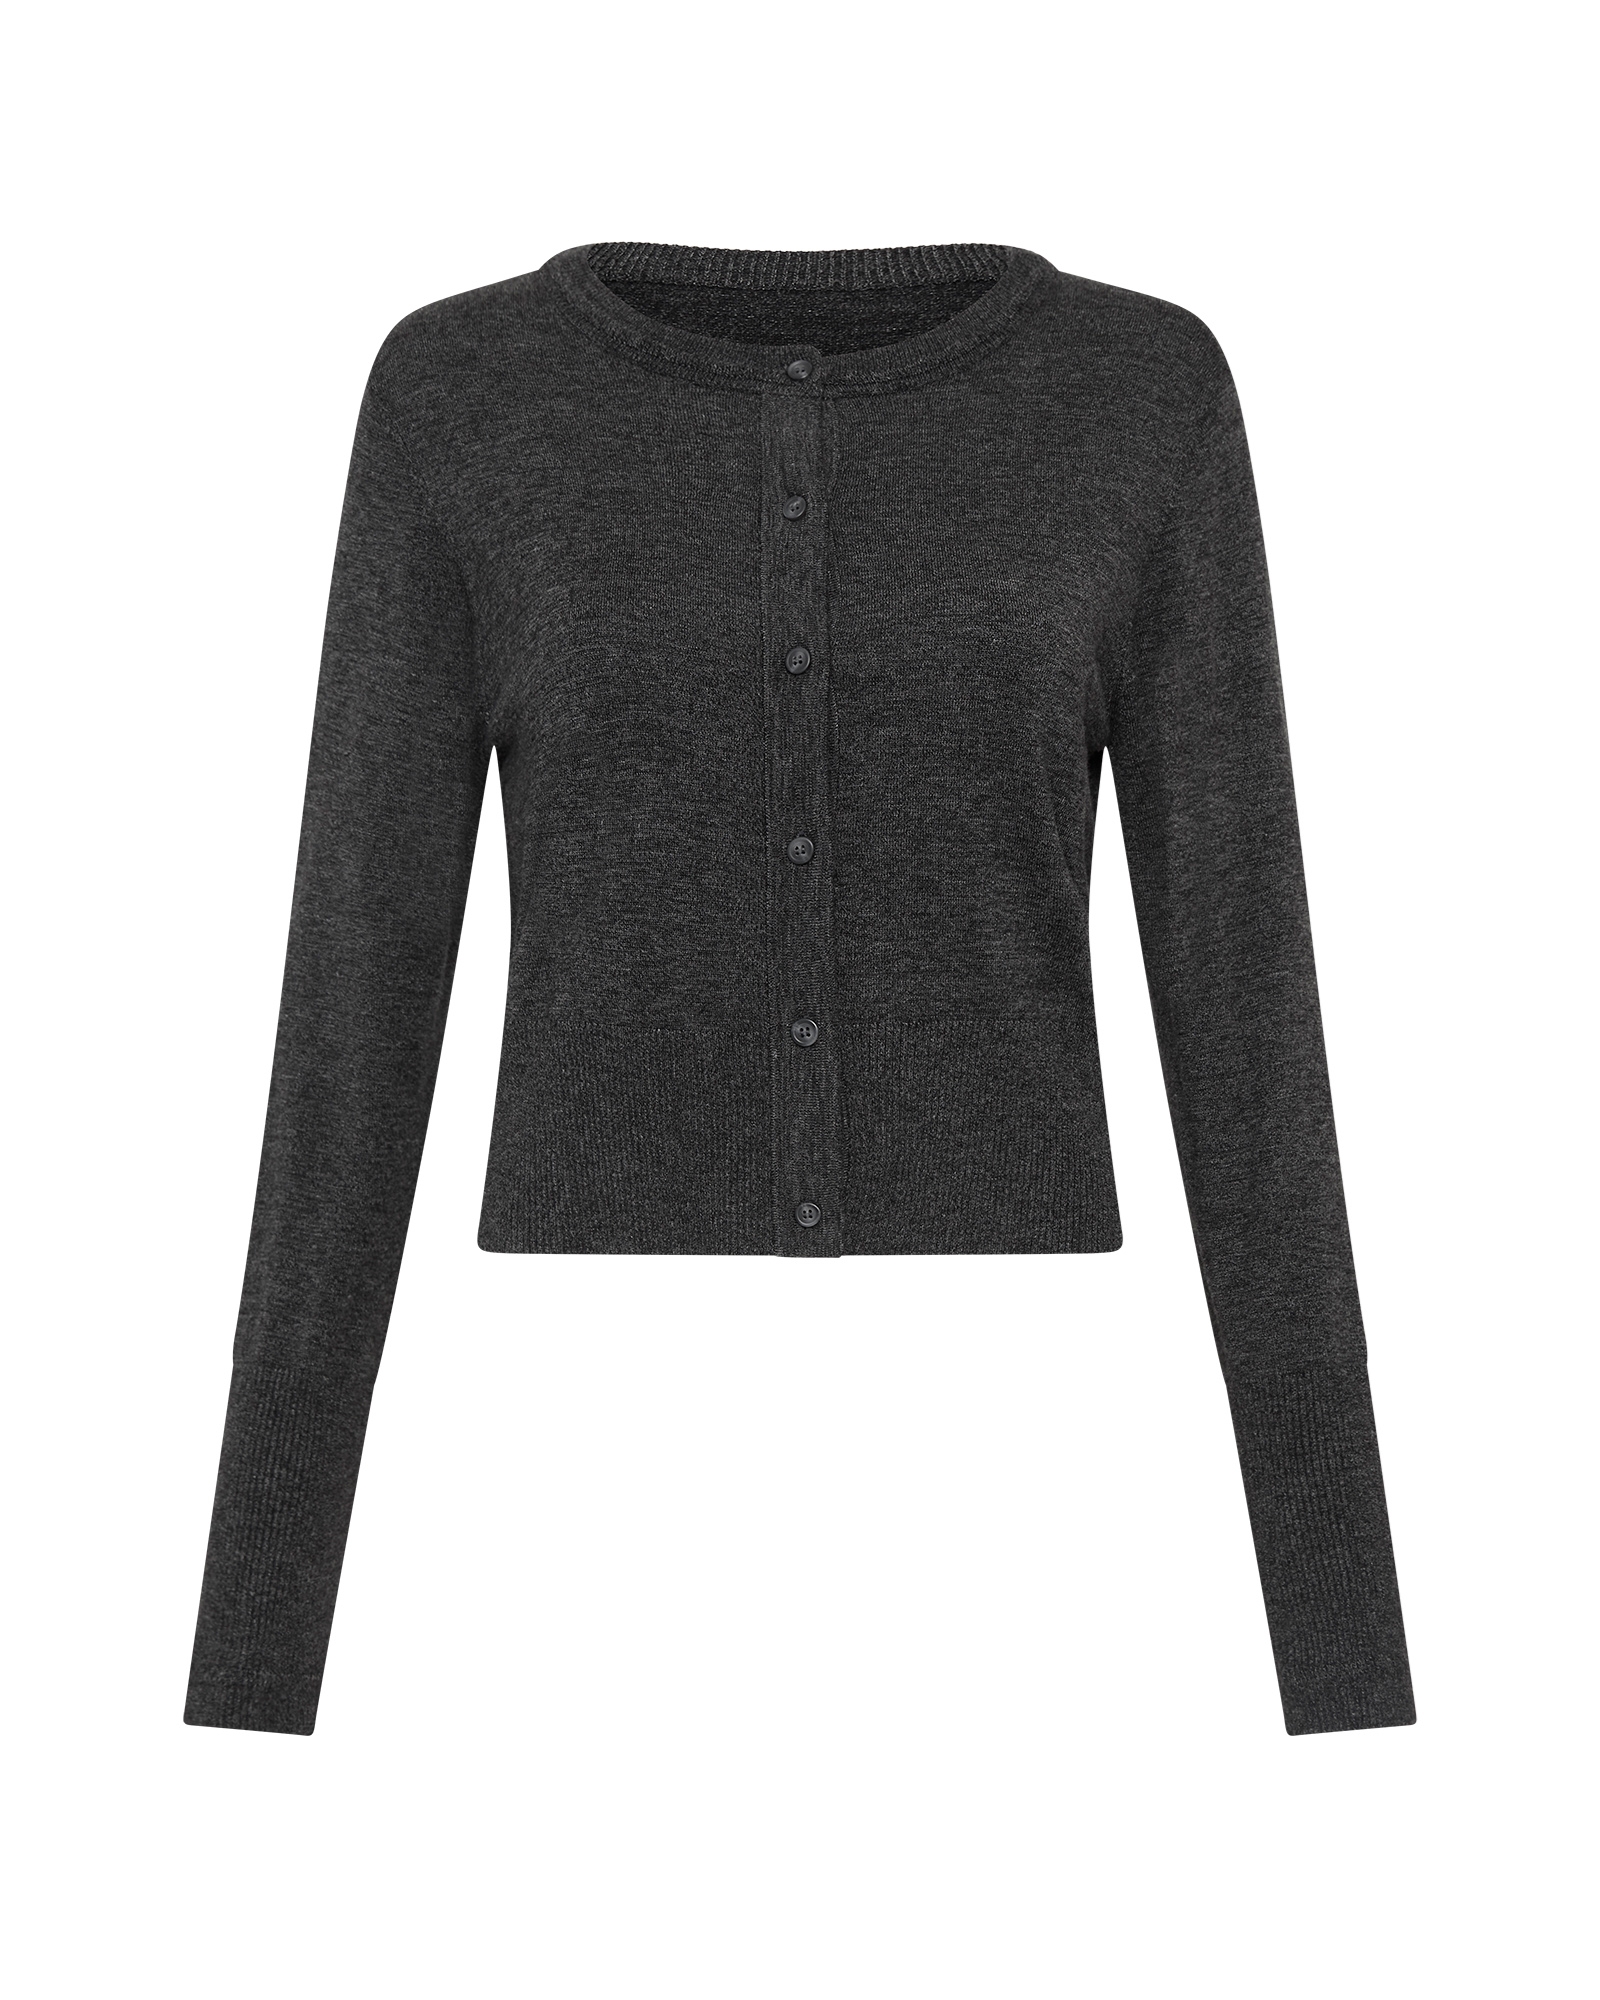 Knitwear | Cropped Round Neck Cardigan | 950 Charcoal